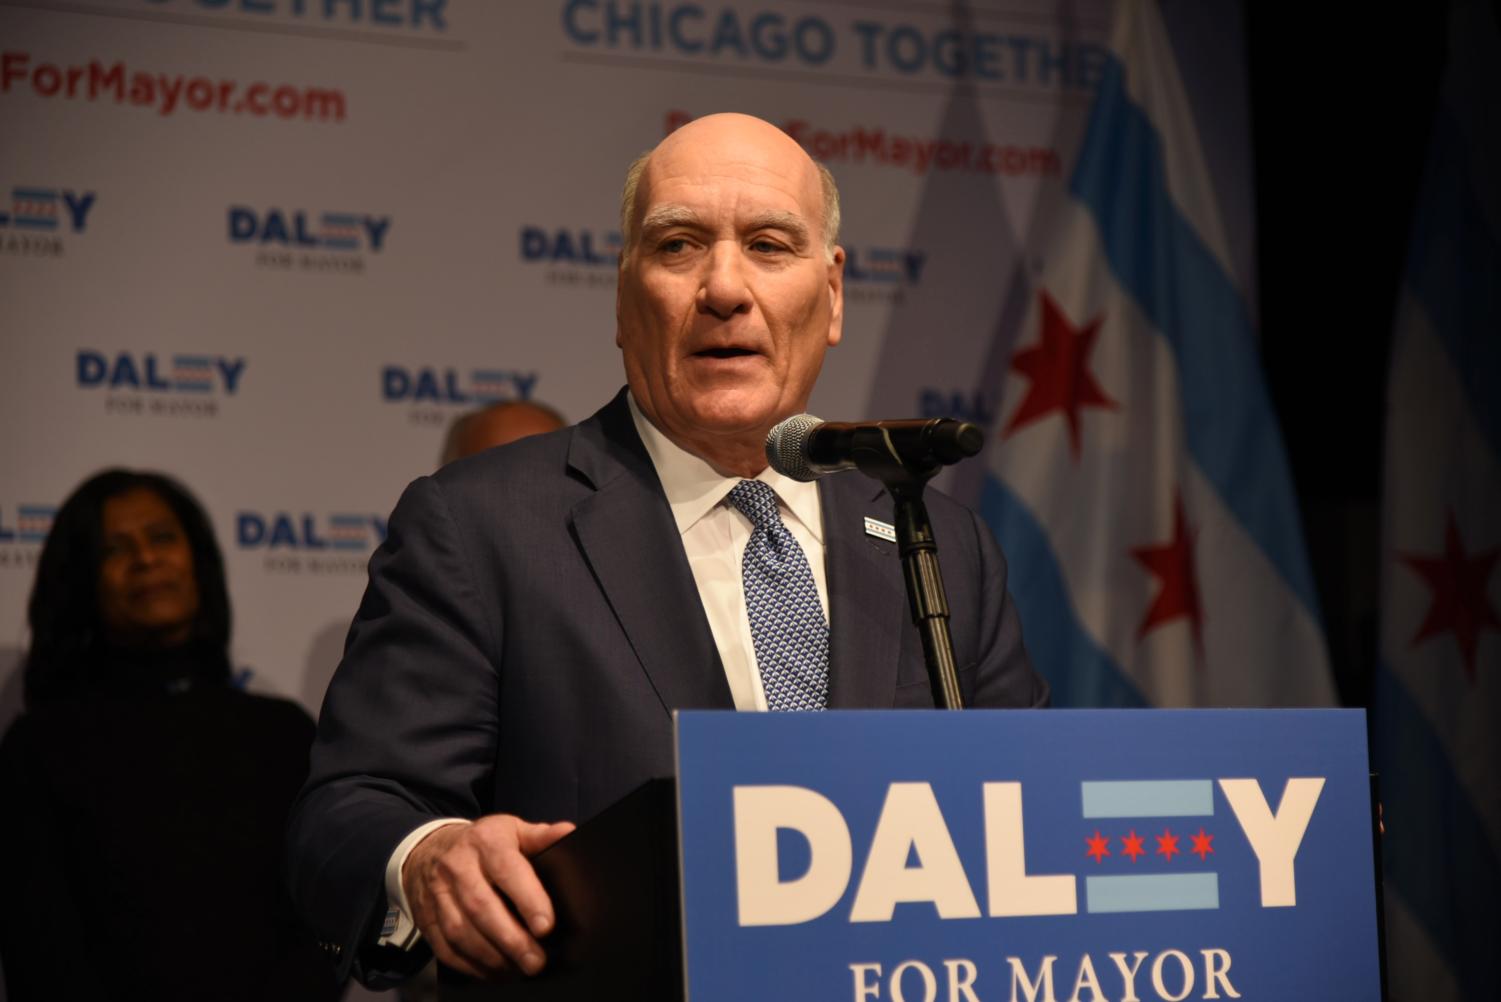 Daley conceded at around 9:40 p.m. on Tuesday night.